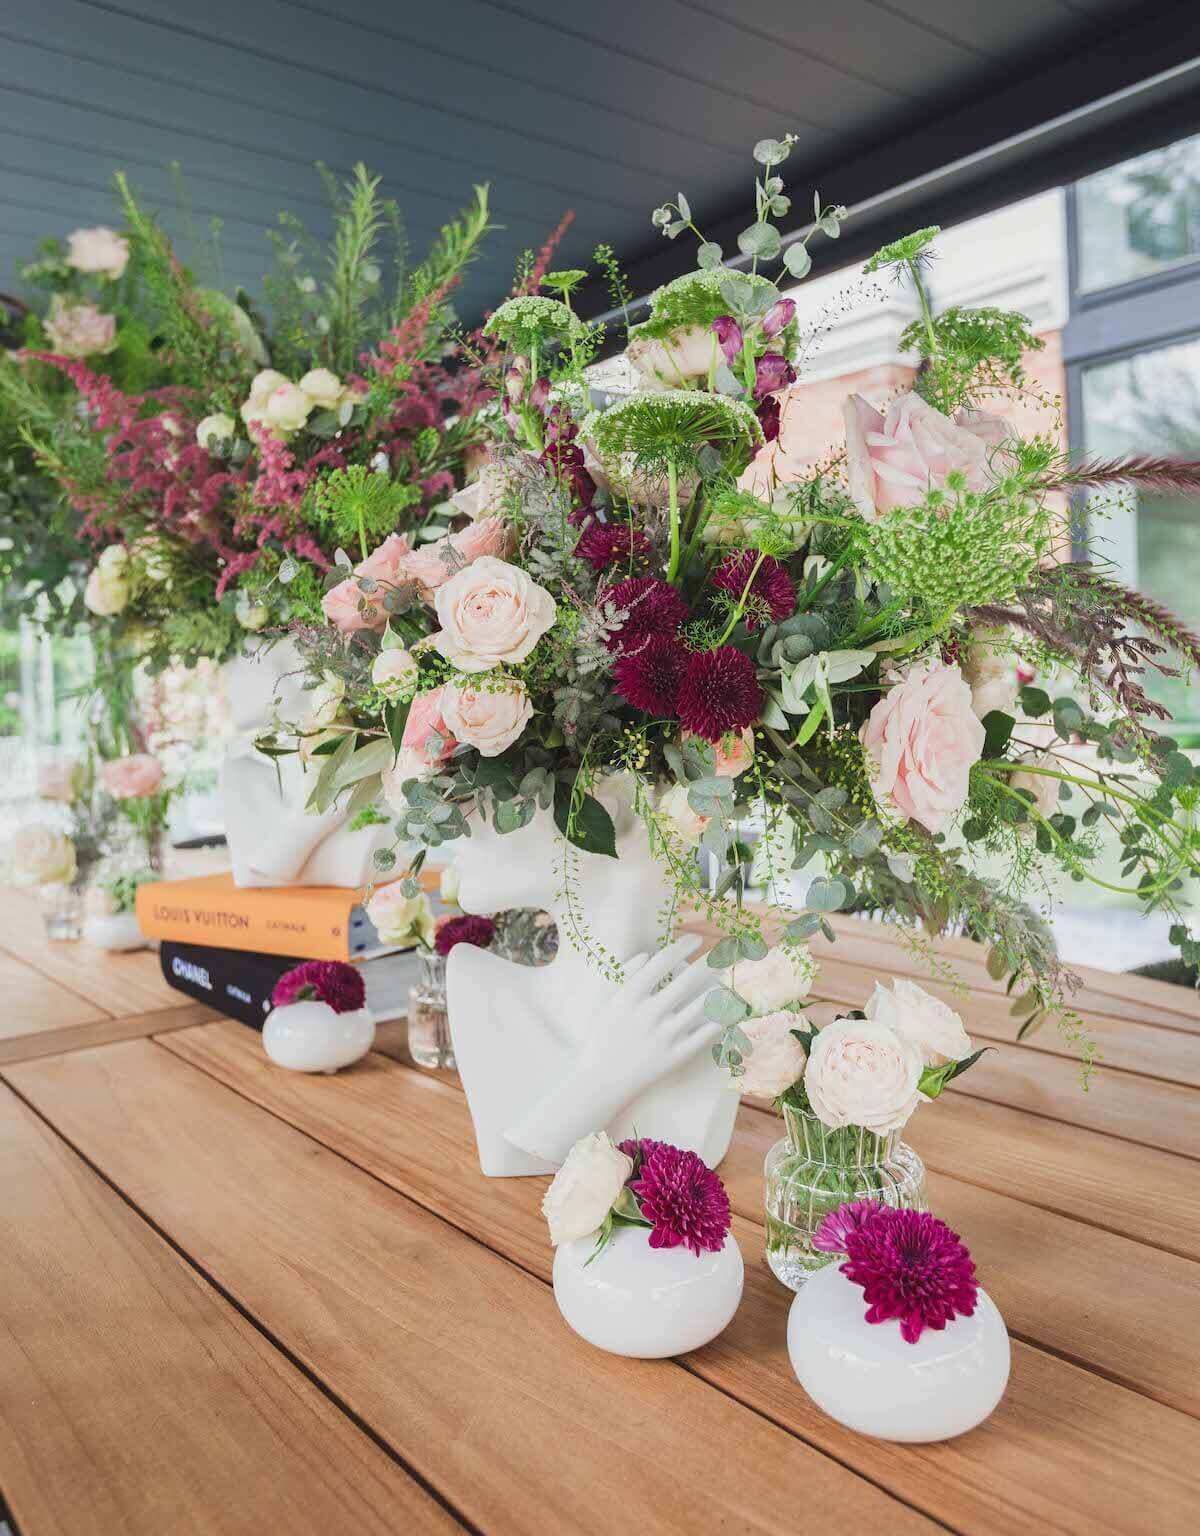 Flower arrangements in a white vase with small flowers sat on a wood table